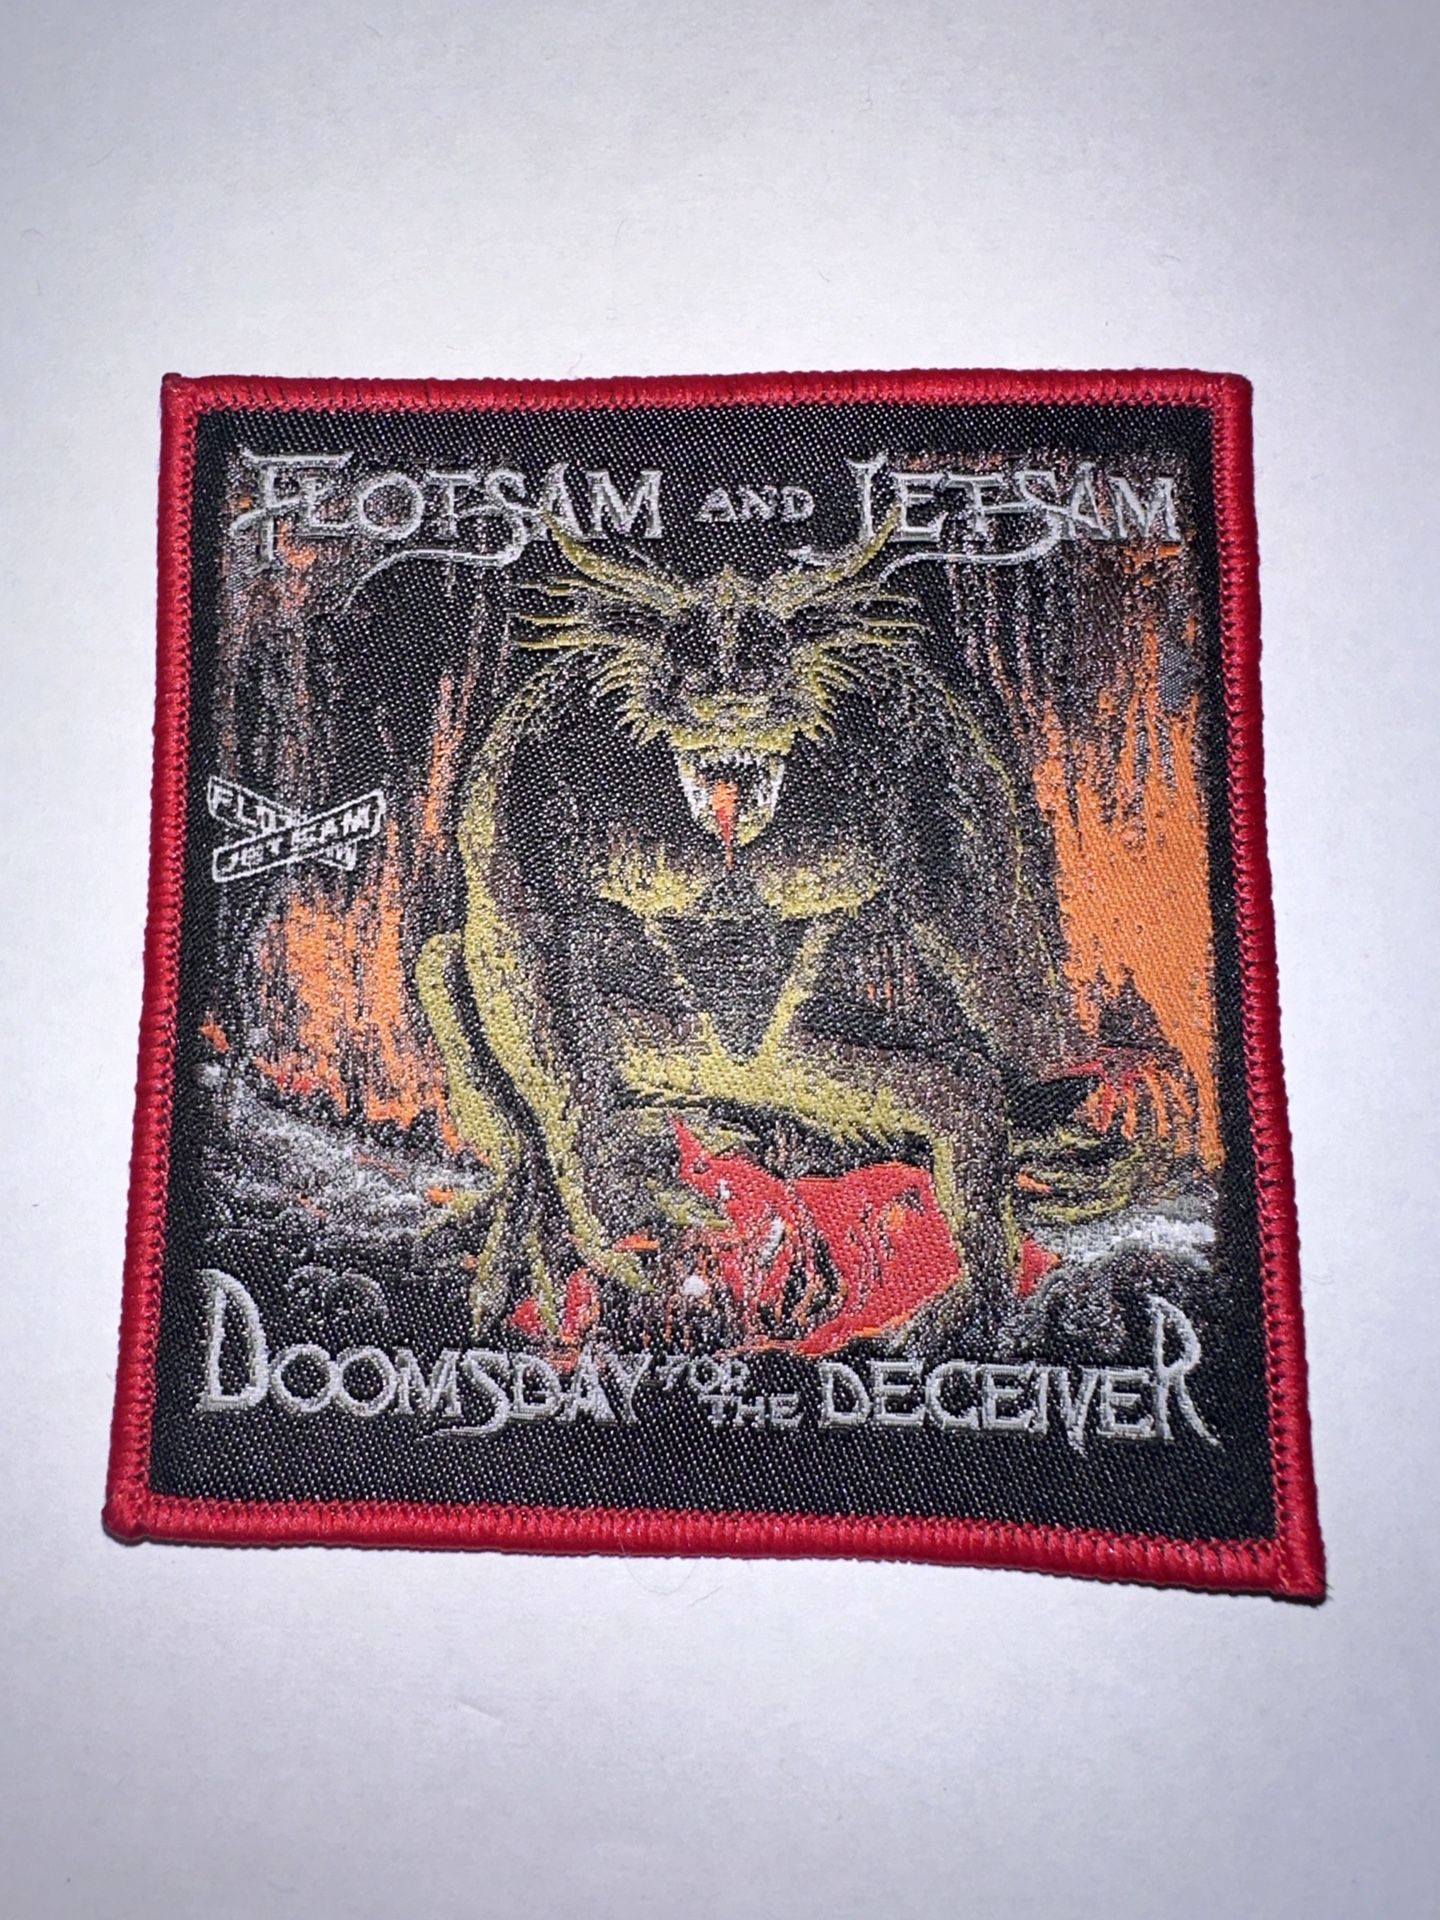 FLOTSAM AND JETSAM, DOOMSDAY FOR THE DECEIVER, SEW ON RED BORDER WOVEN PATCH